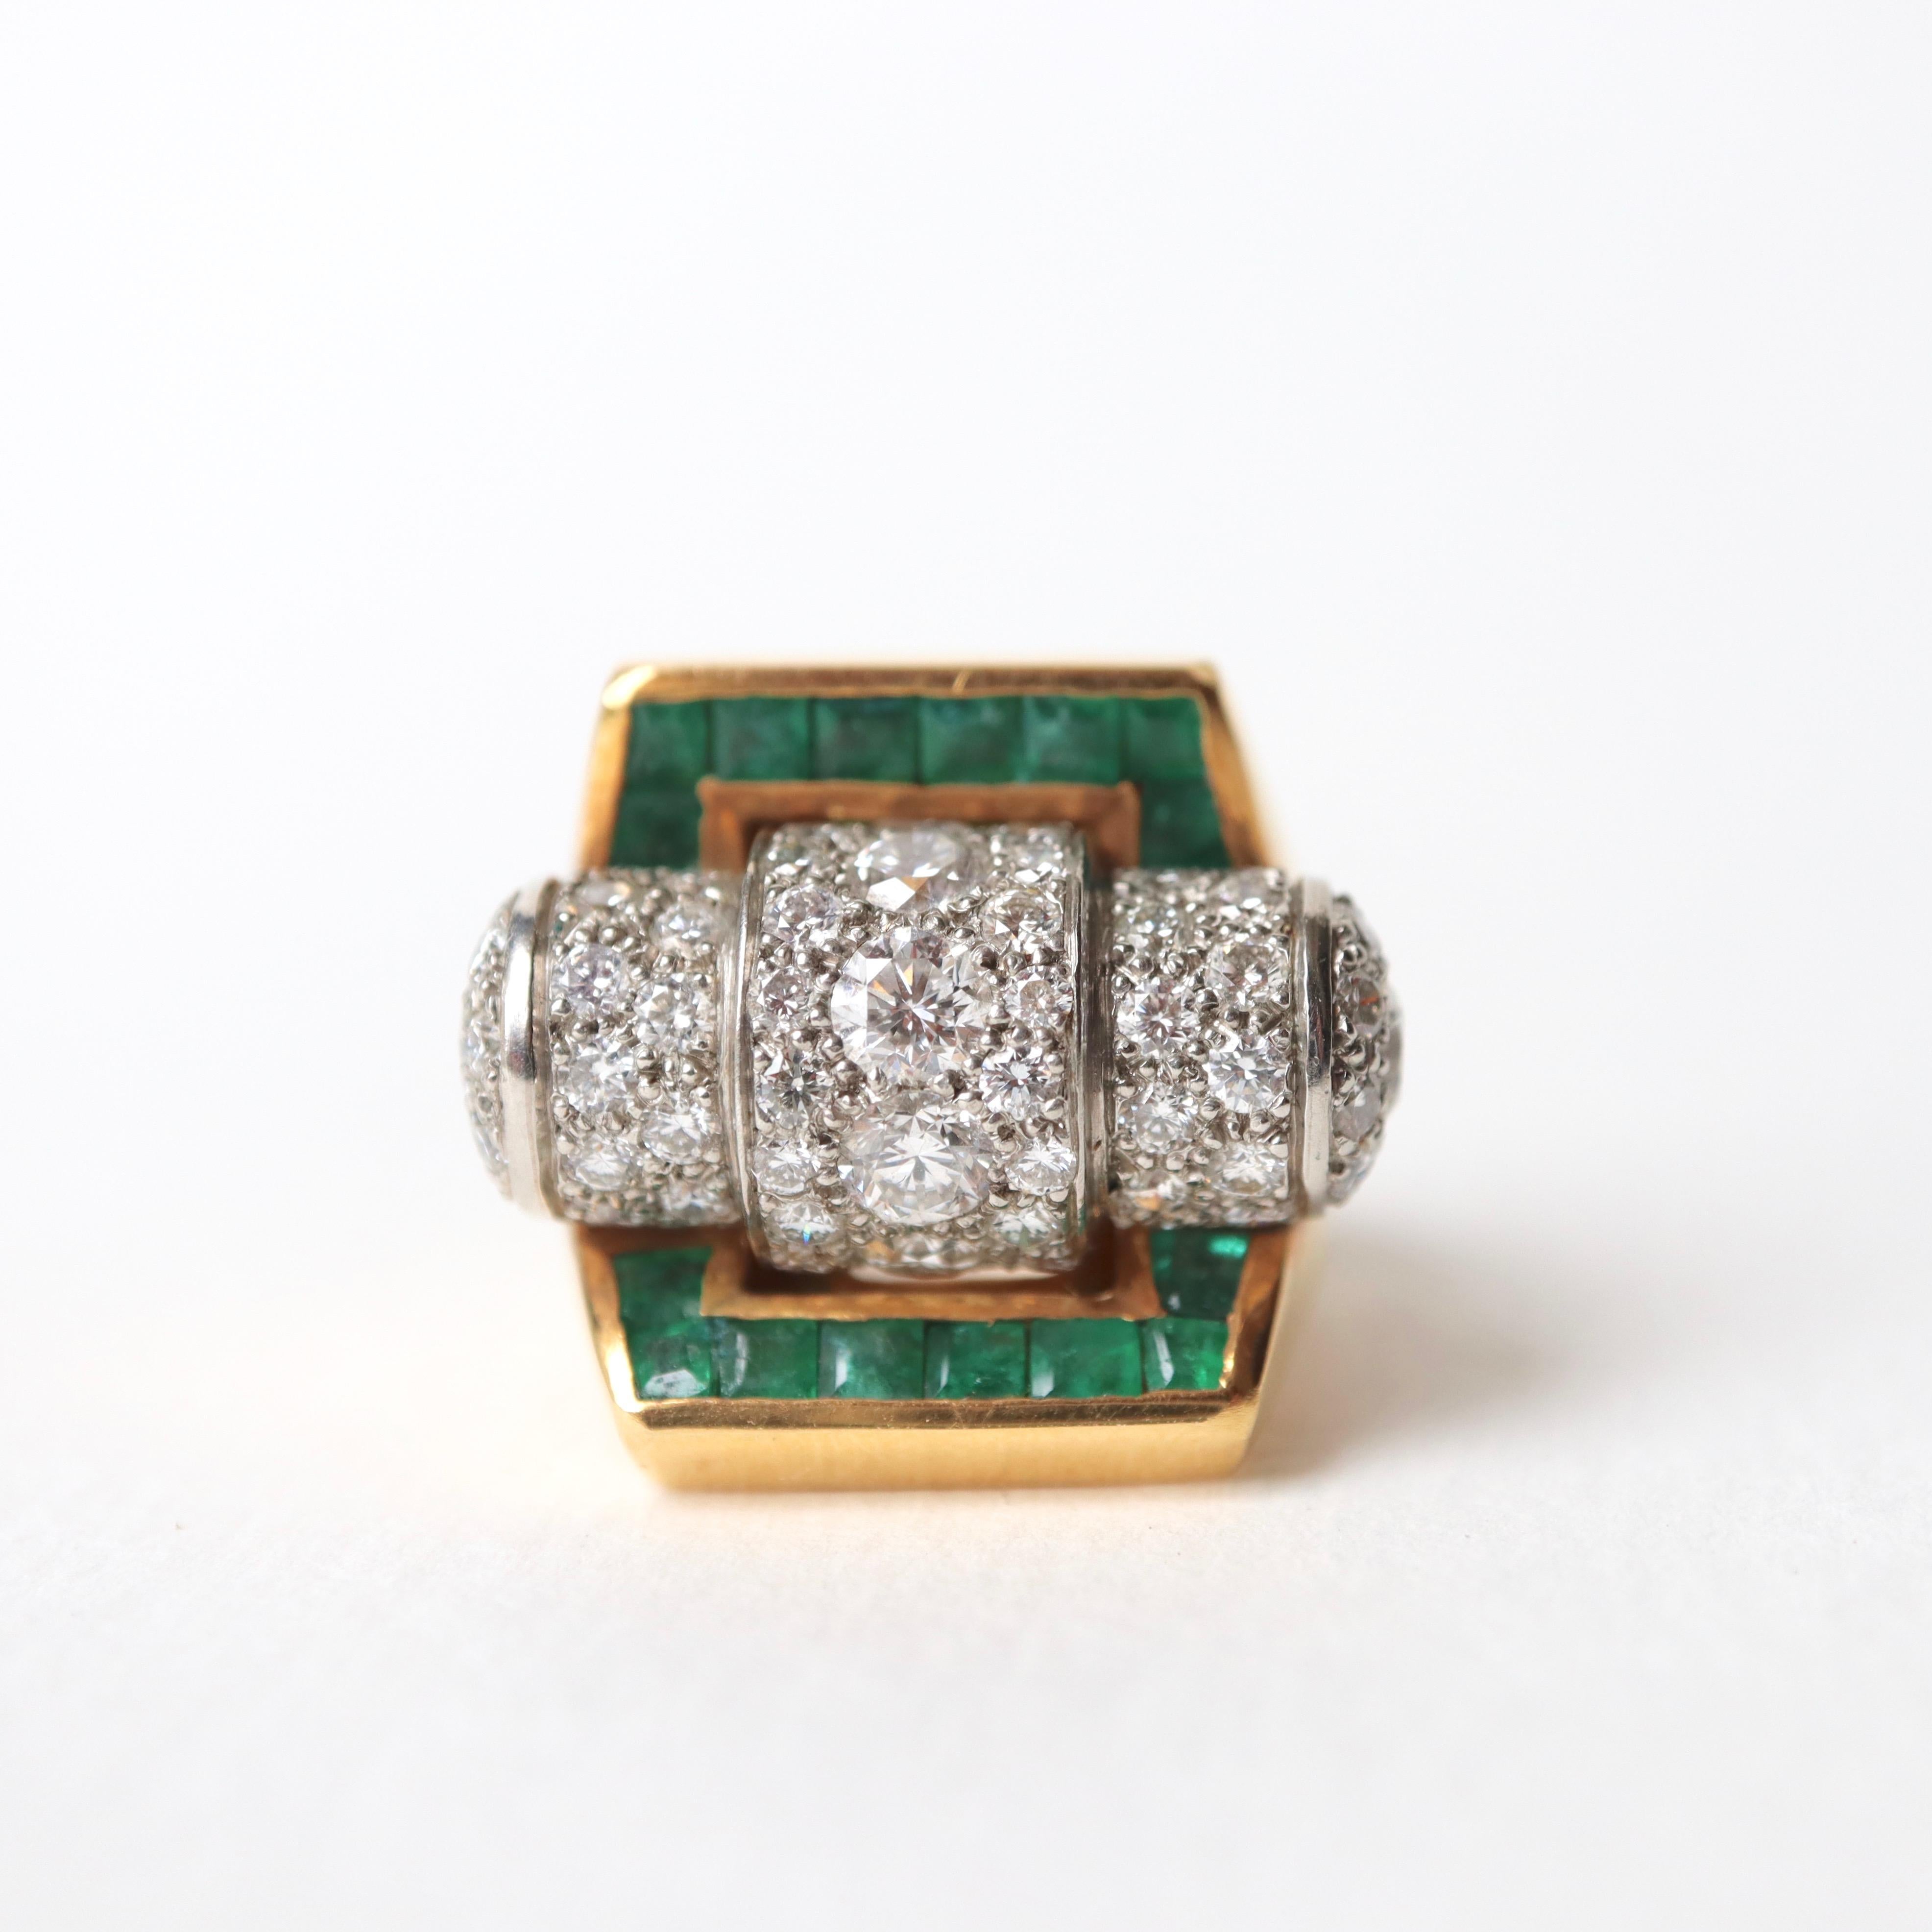 1940's 18 Carat yellow Gold Ring, Platinum Roll set with Diamonds and Calibrated Emeralds.
Gross Weight: 14.3 g
Platinum 950/1000 Head of Dog Hallmark and 18k yellow Gold (750/1000) Head of Eagle Hallmark
Size 49

The International Exhibition of